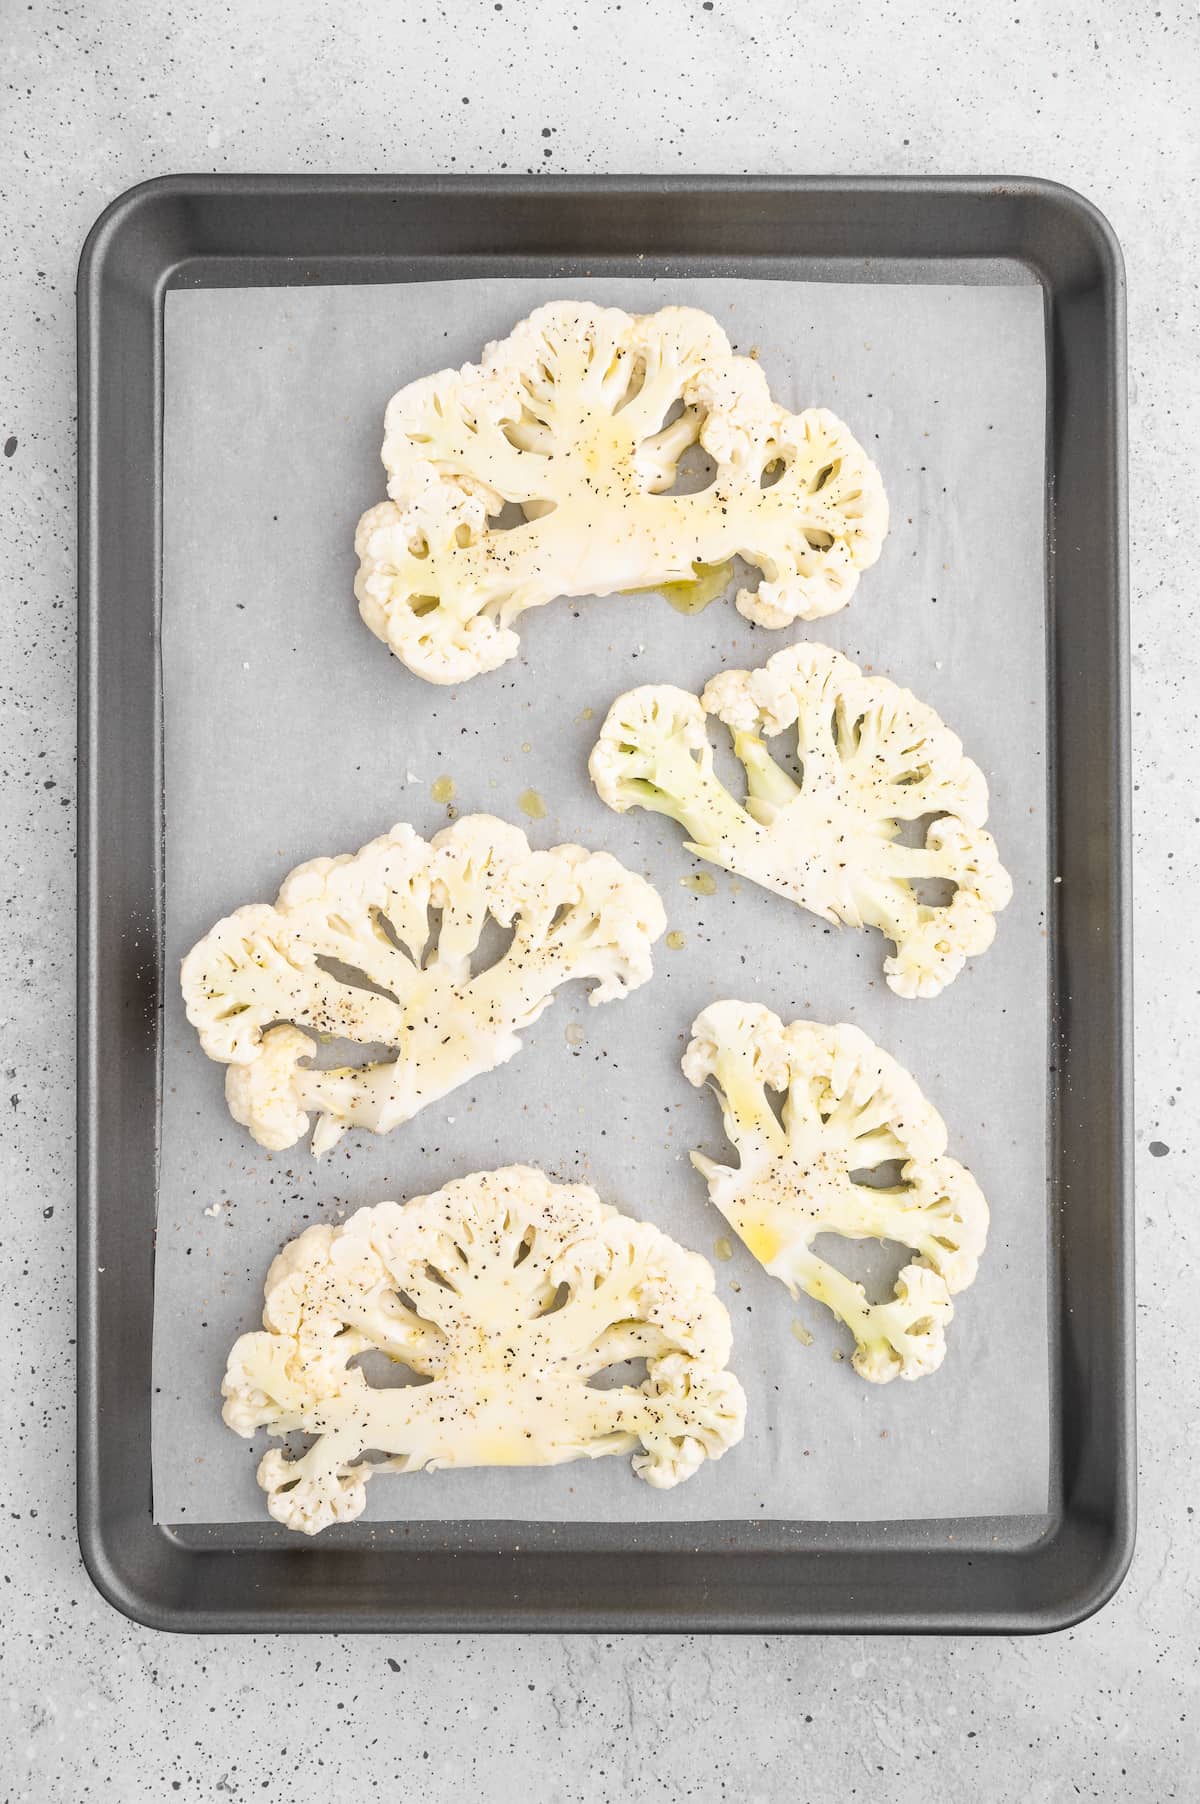 The cauliflower steaks on a baking tray after adding oil, salt, and pepper.